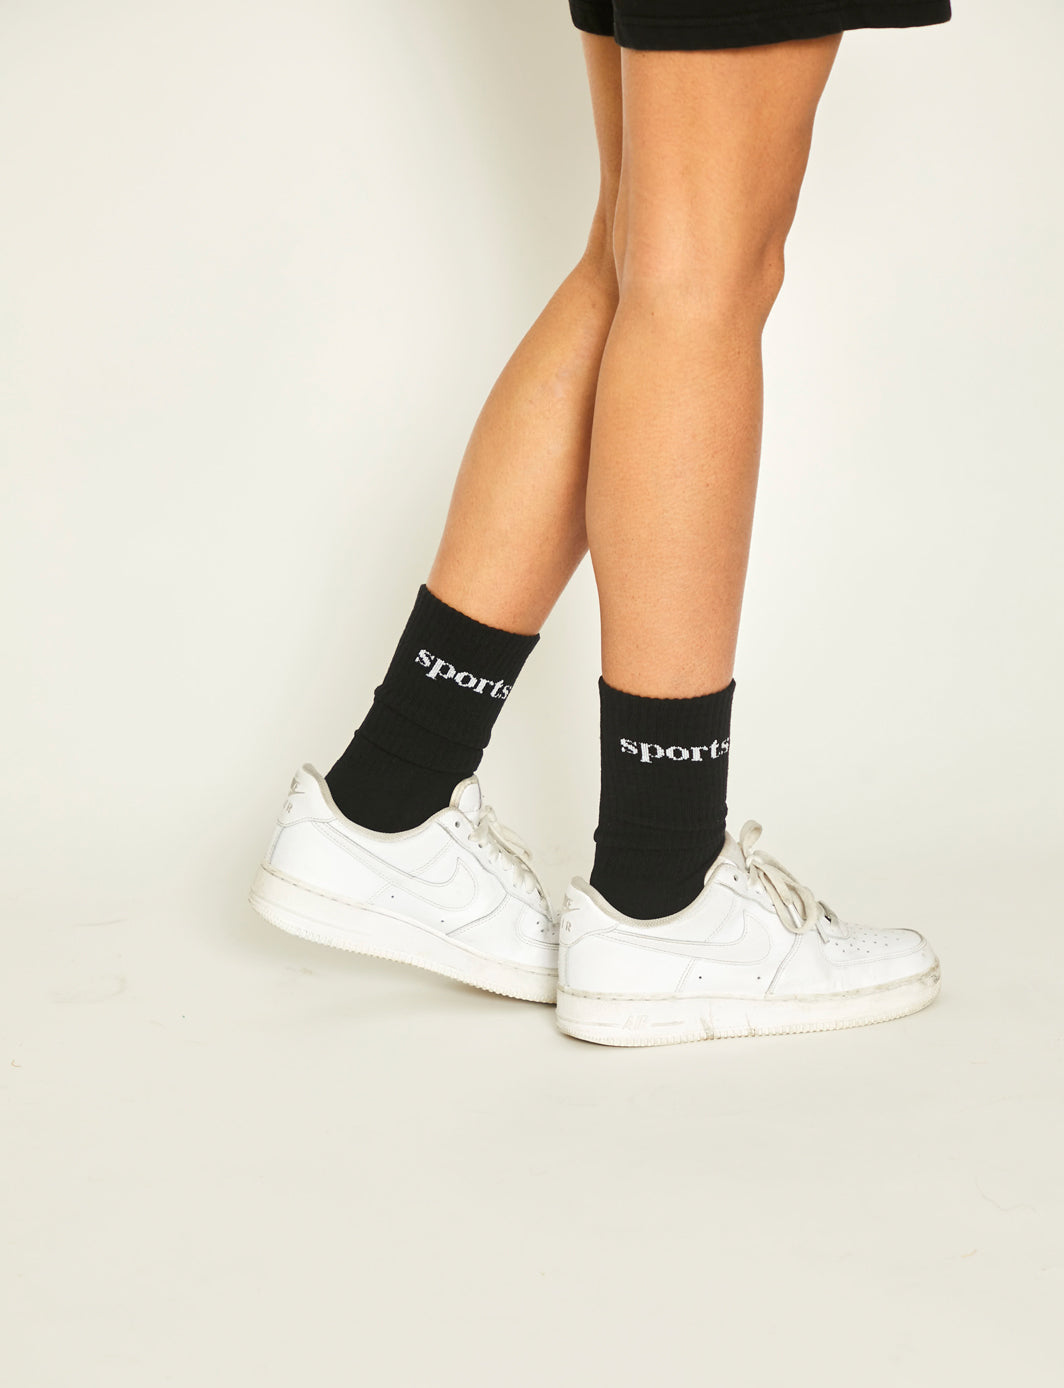 Sports Socks - Black with White Text